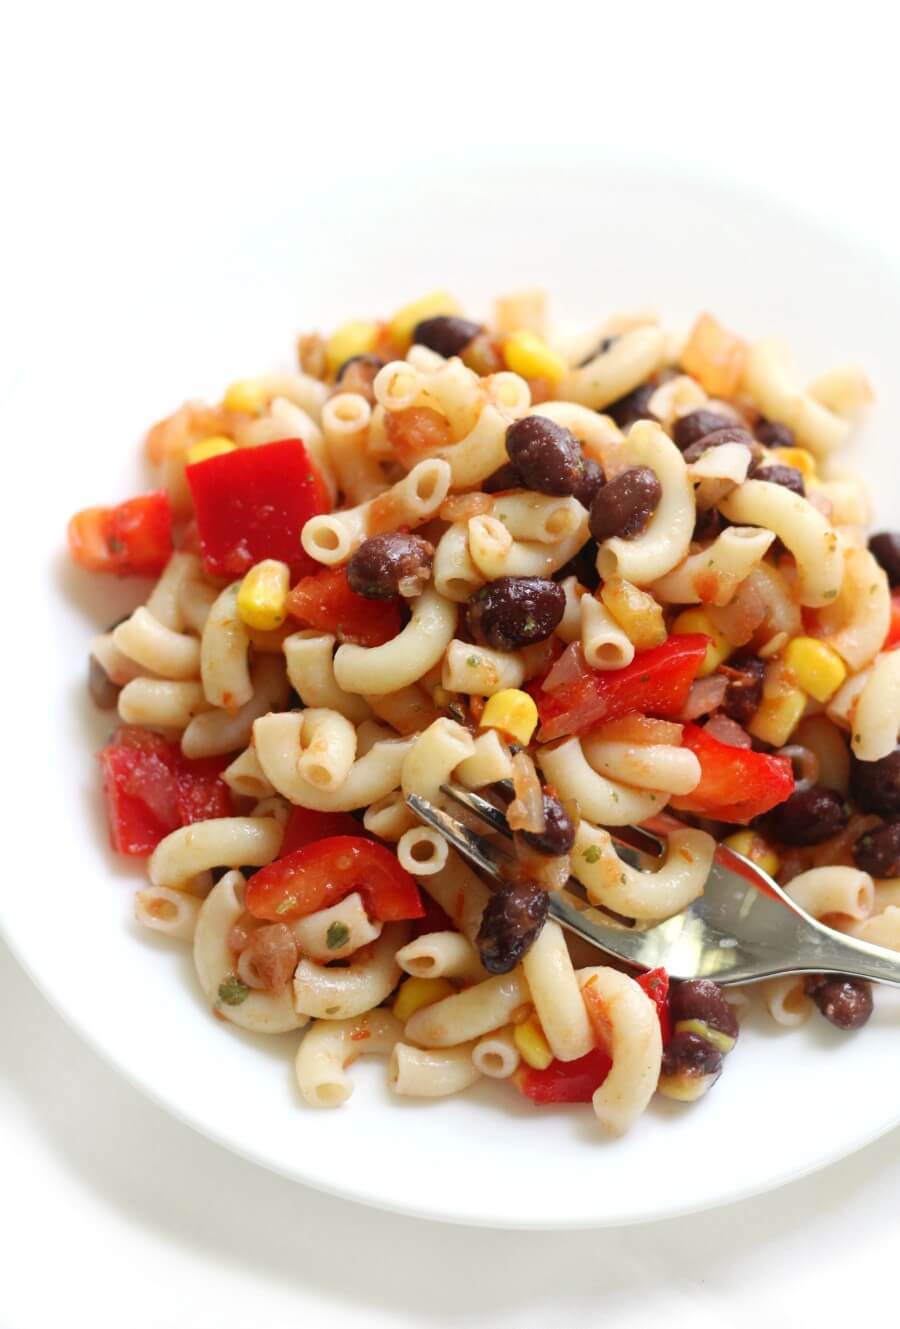 plate of gluten-free Mexican pasta salad with fork